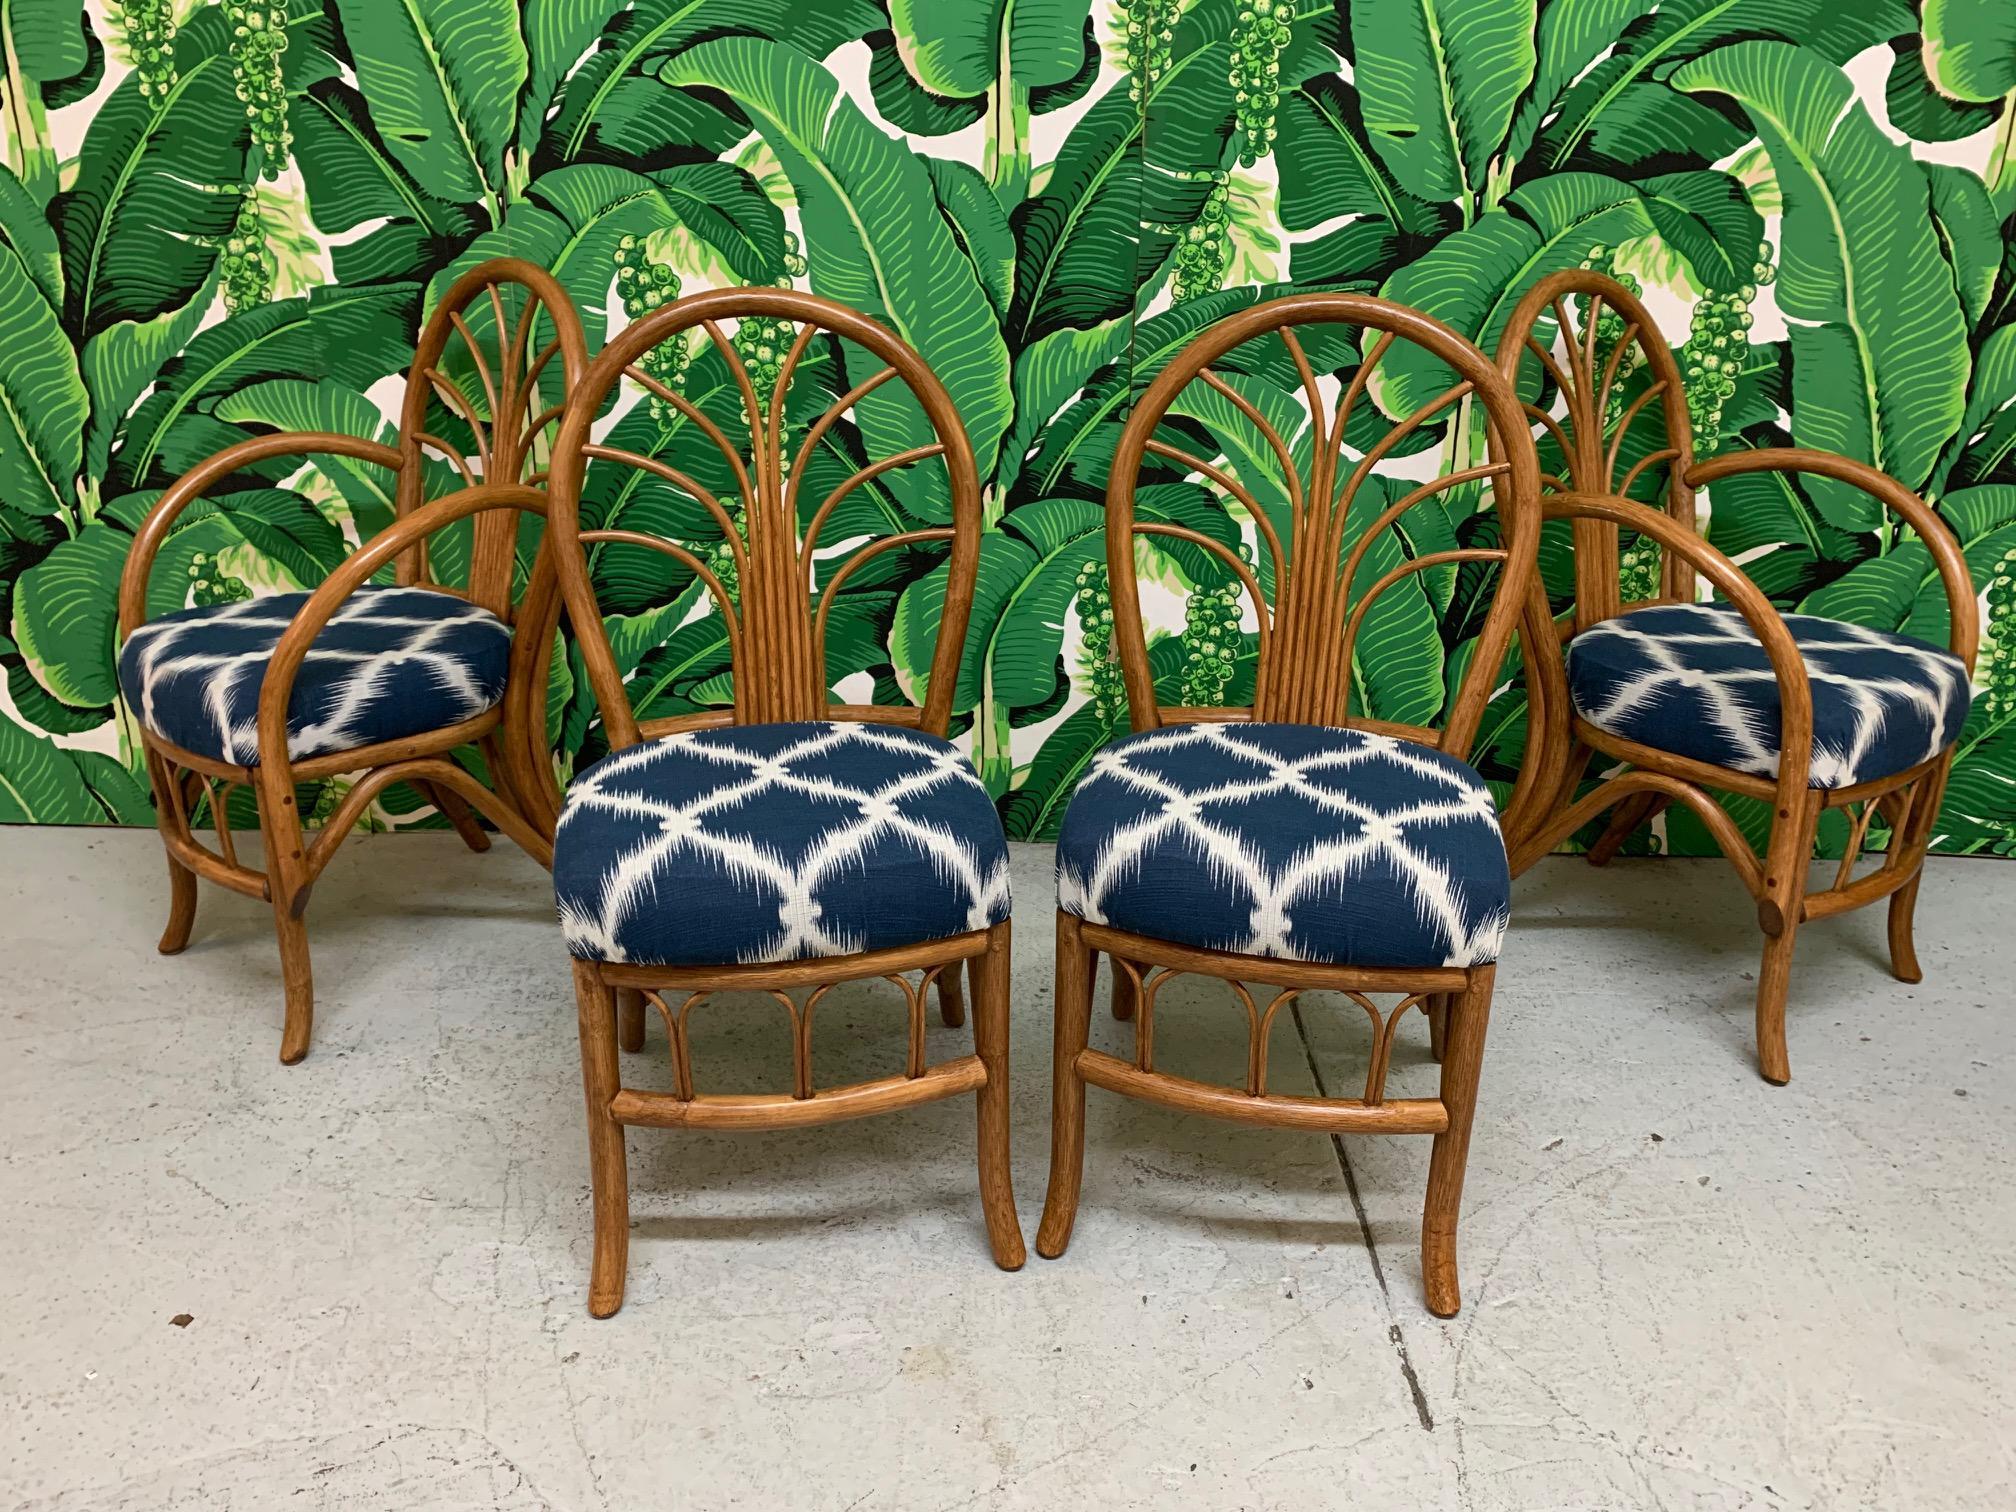 Set of four vintage rattan dining chairs includes two side chairs and two arm chairs. Upholstered in blue and white modern fabric. Very good condition with only very minor imperfections consistent with age. Side chairs measure 16.5